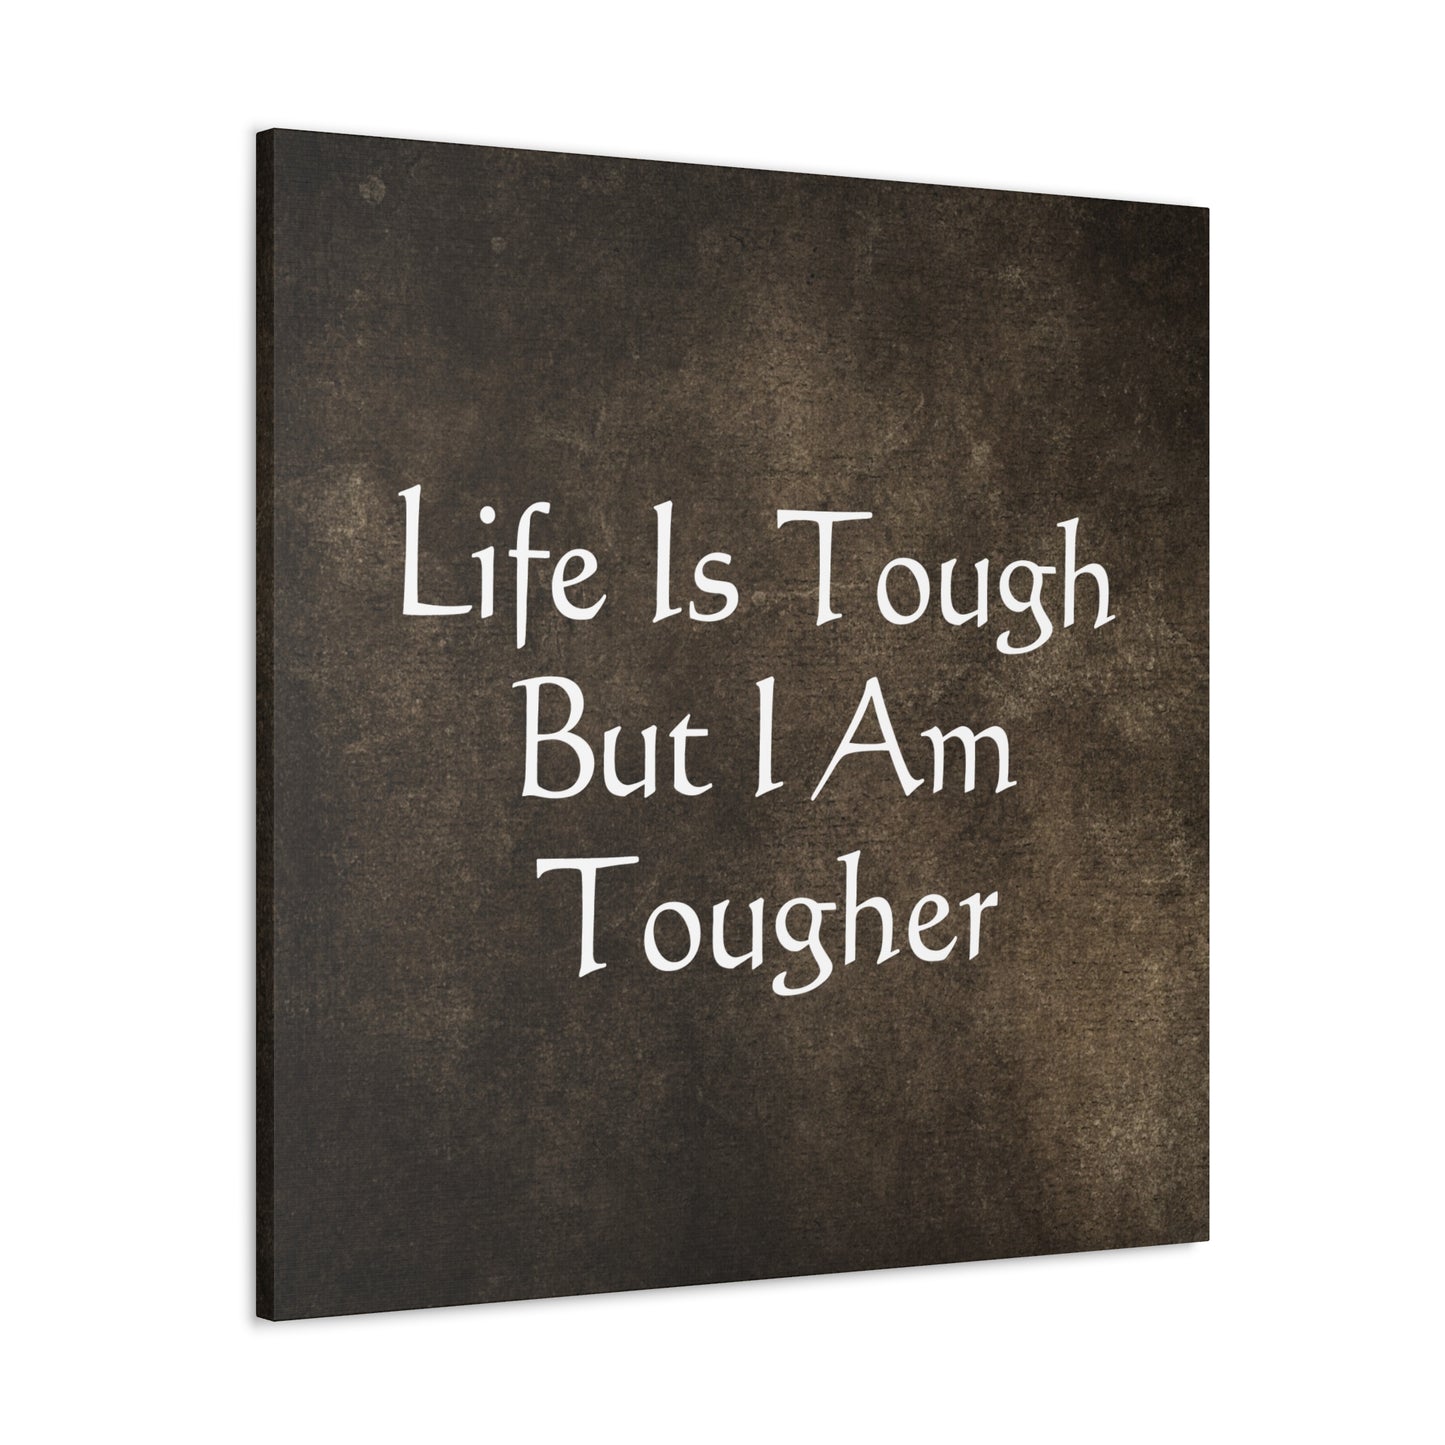 "Life Is Tough, But I Am Tougher" Wall Art - Weave Got Gifts - Unique Gifts You Won’t Find Anywhere Else!